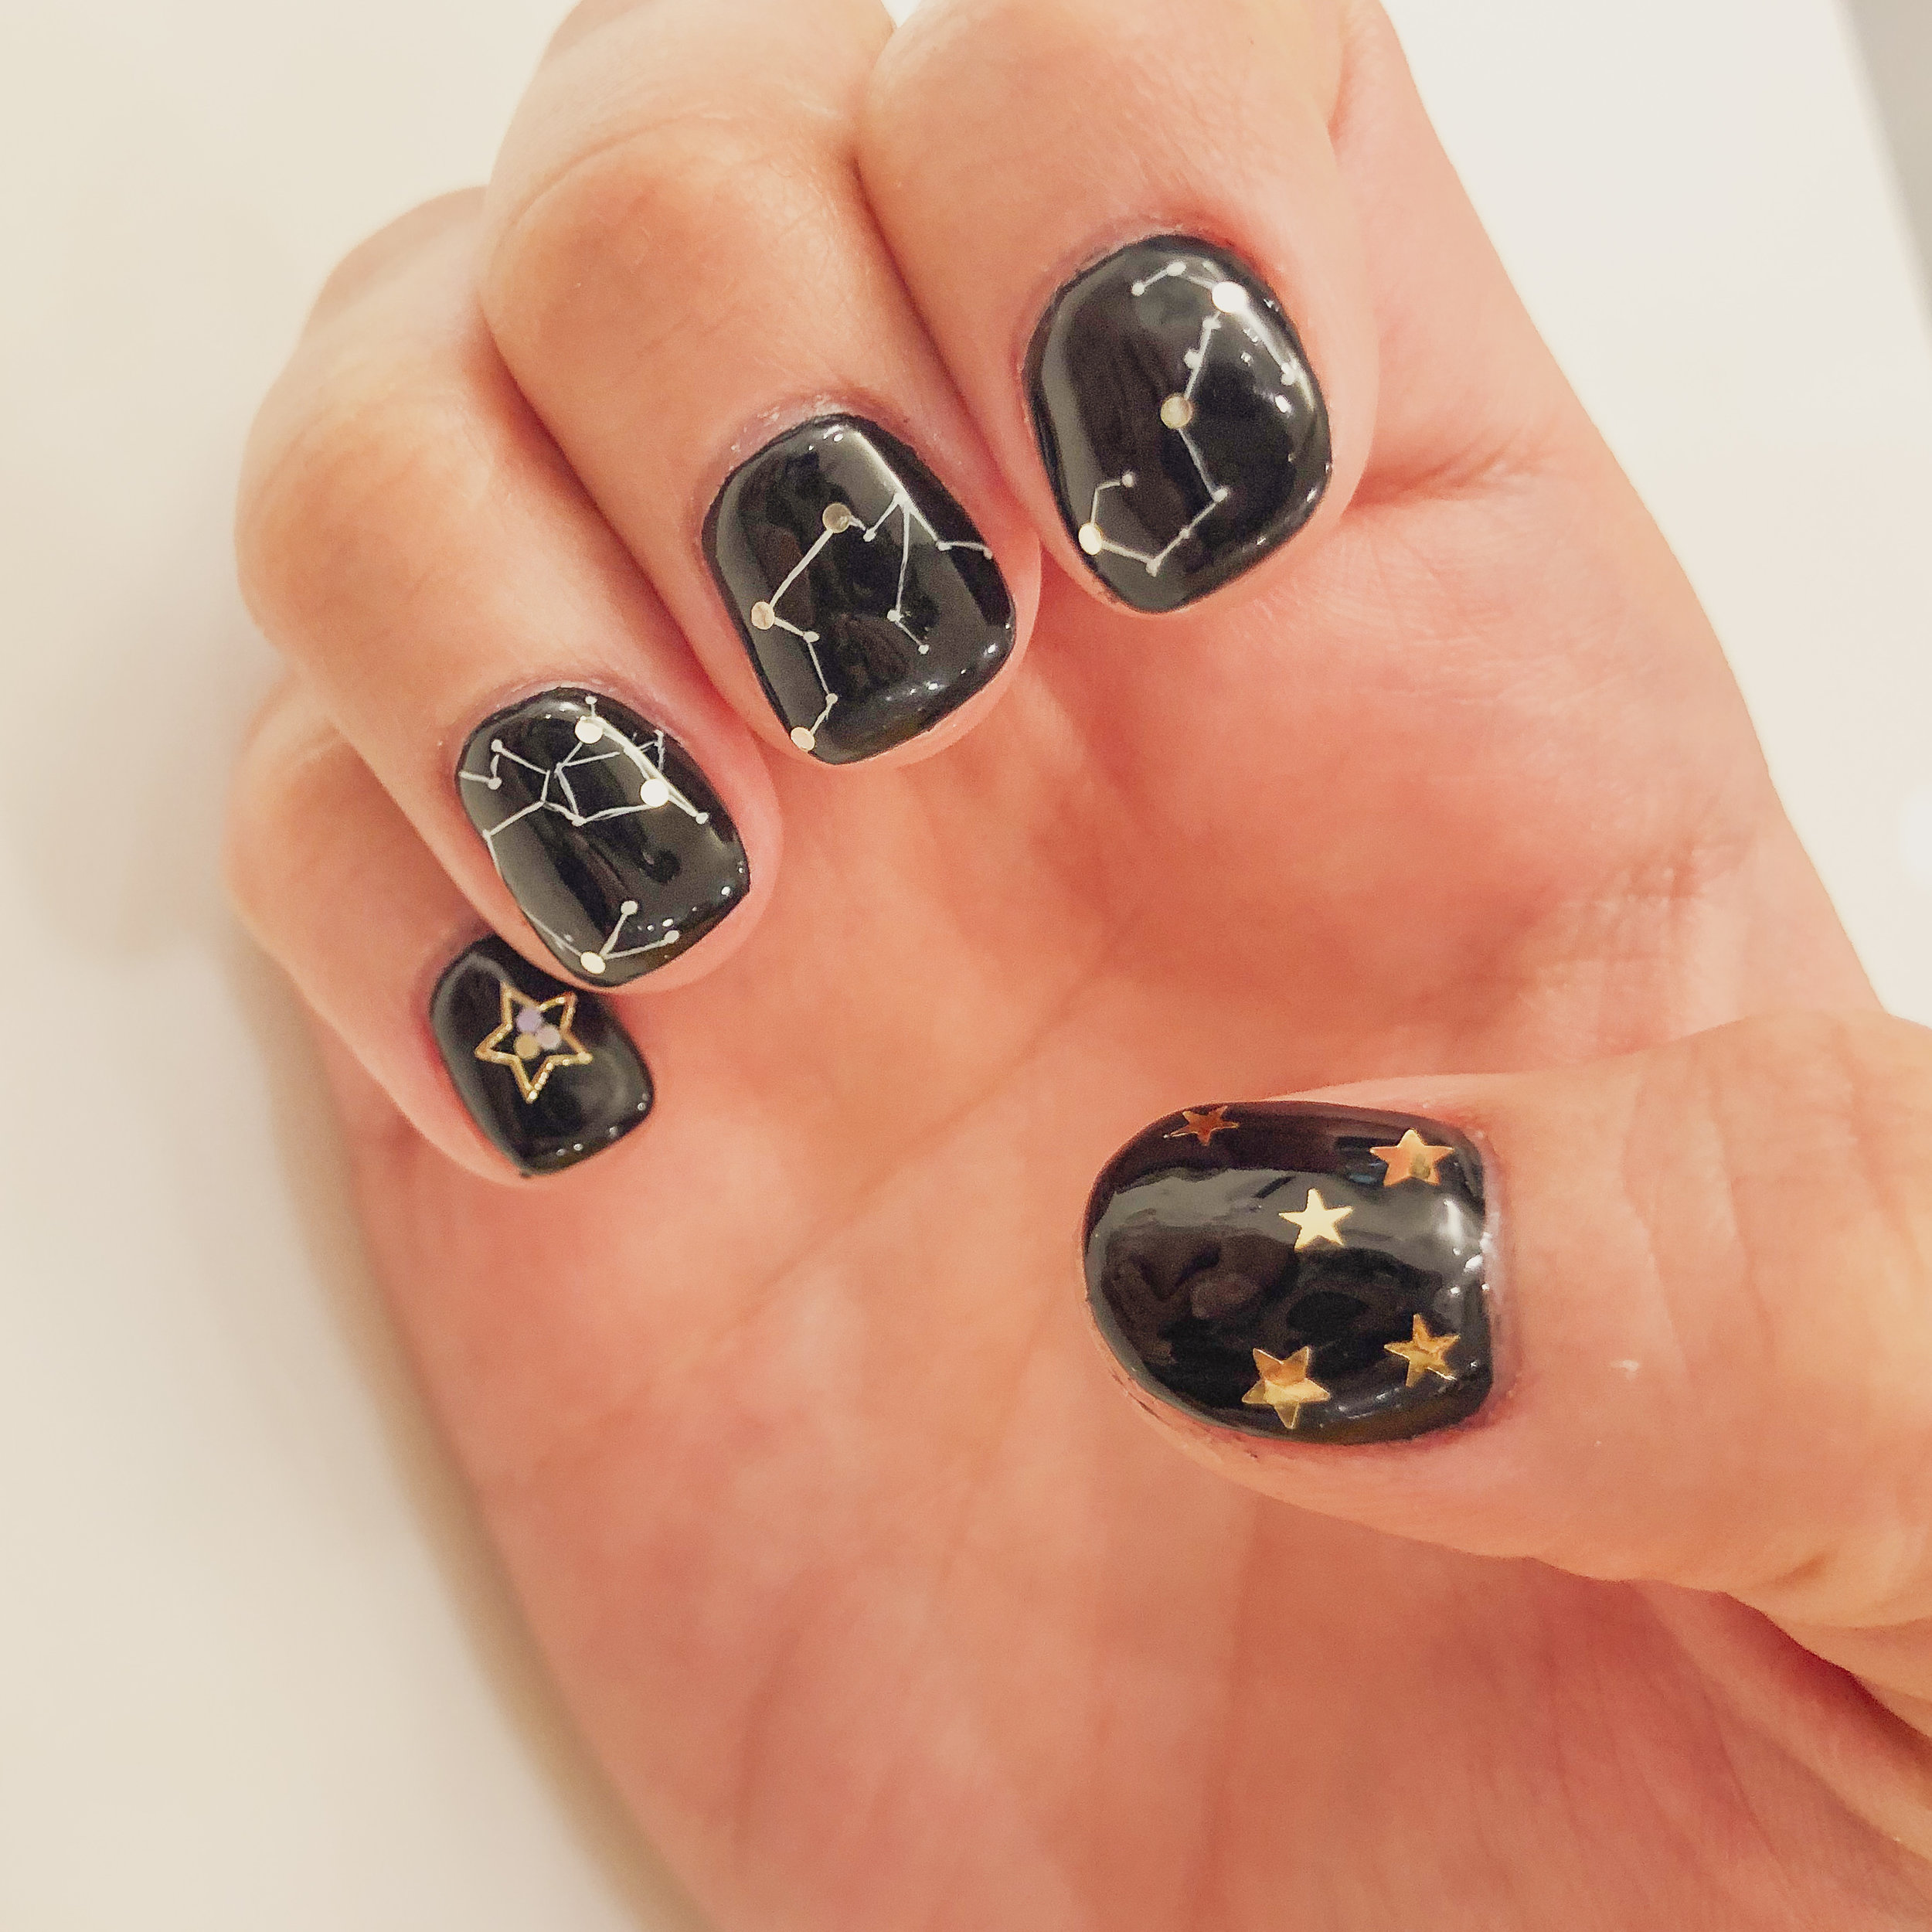 21 Trendy Black & White Nail Art Designs For Your Every Mood